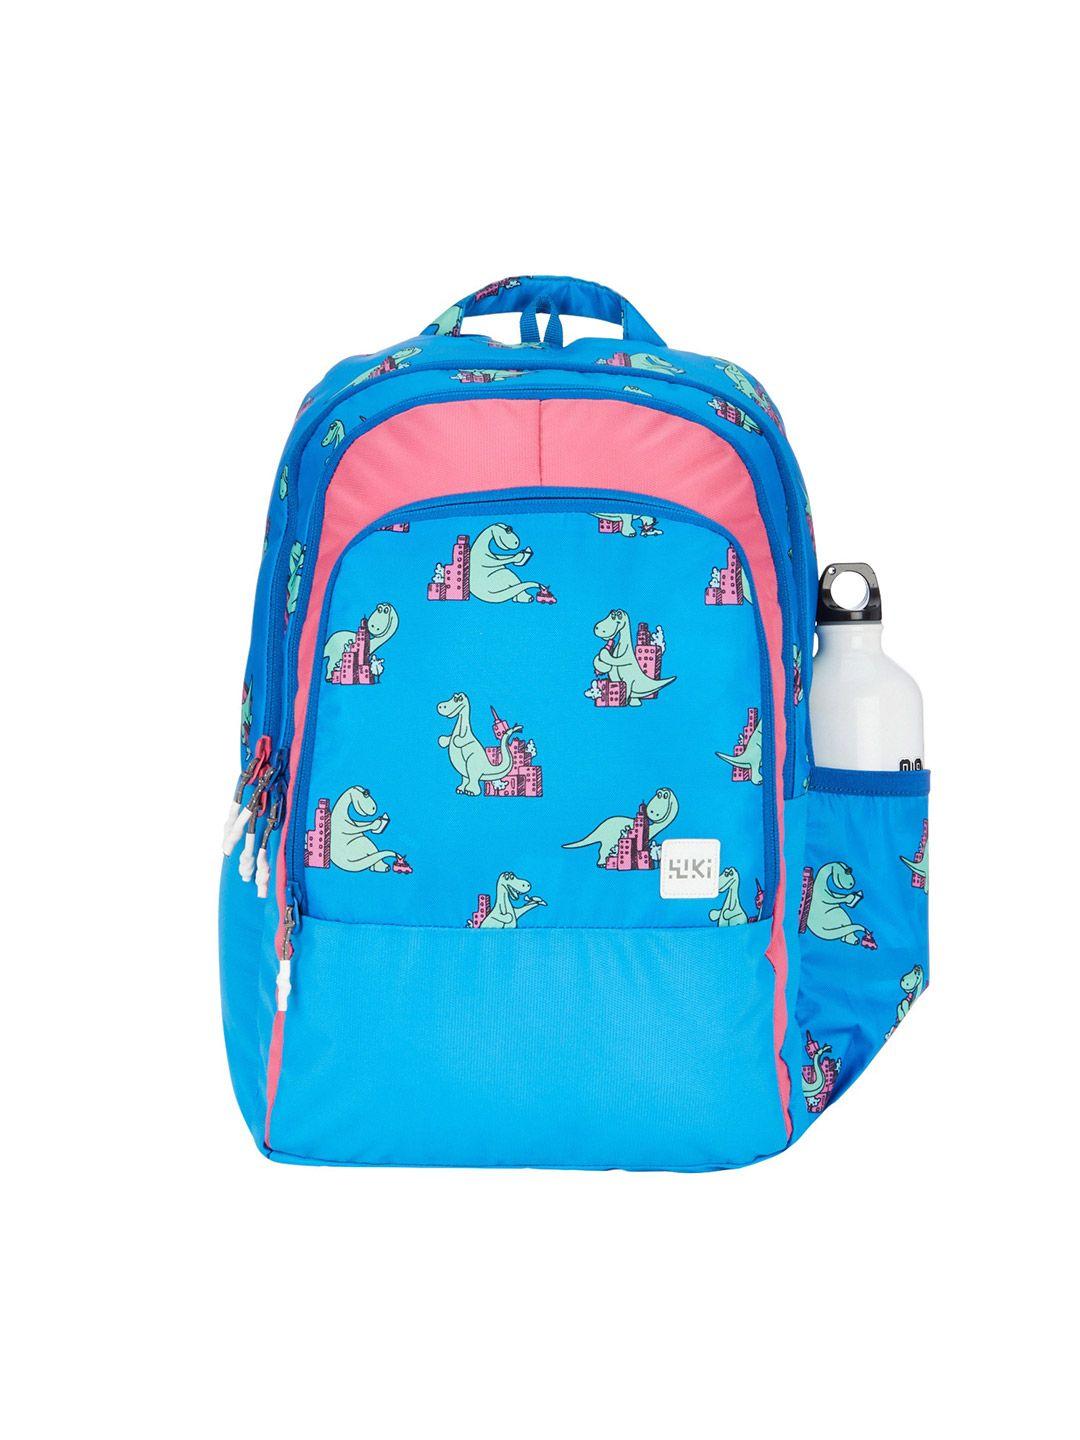 wildcraft graphic printed wiki champ 5 backpack